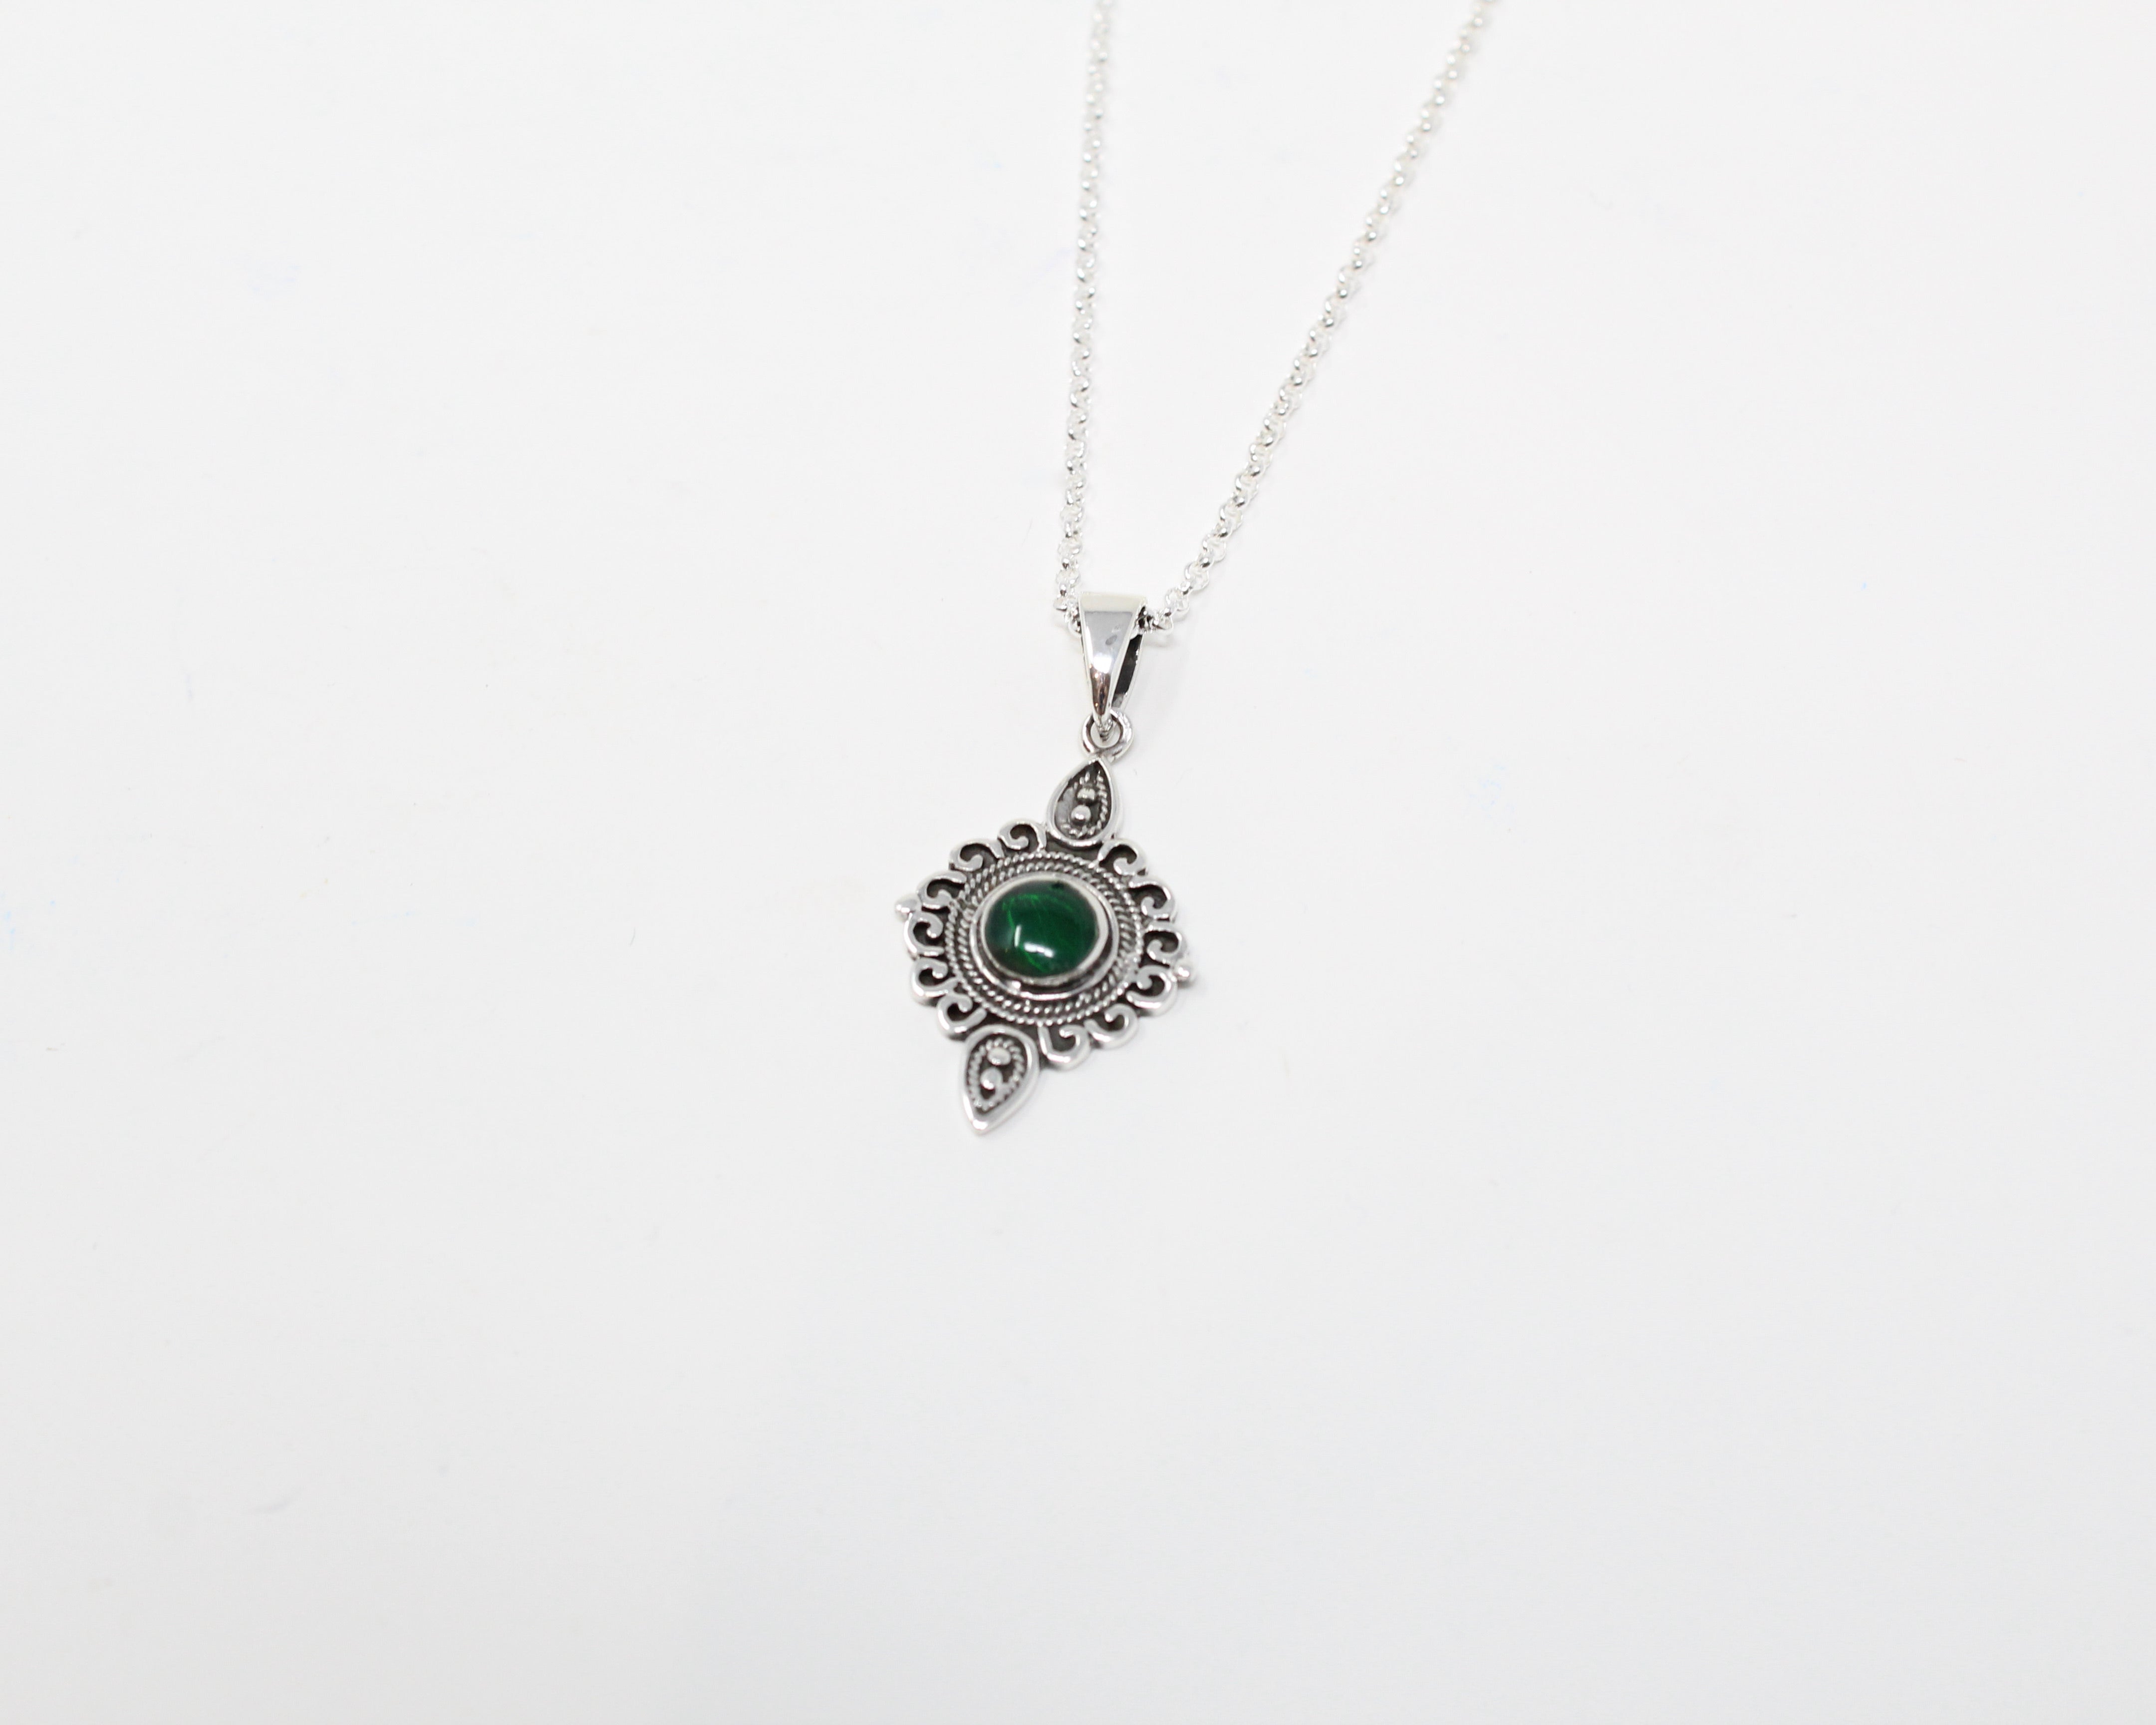 KRUNG, collier argent sterling.